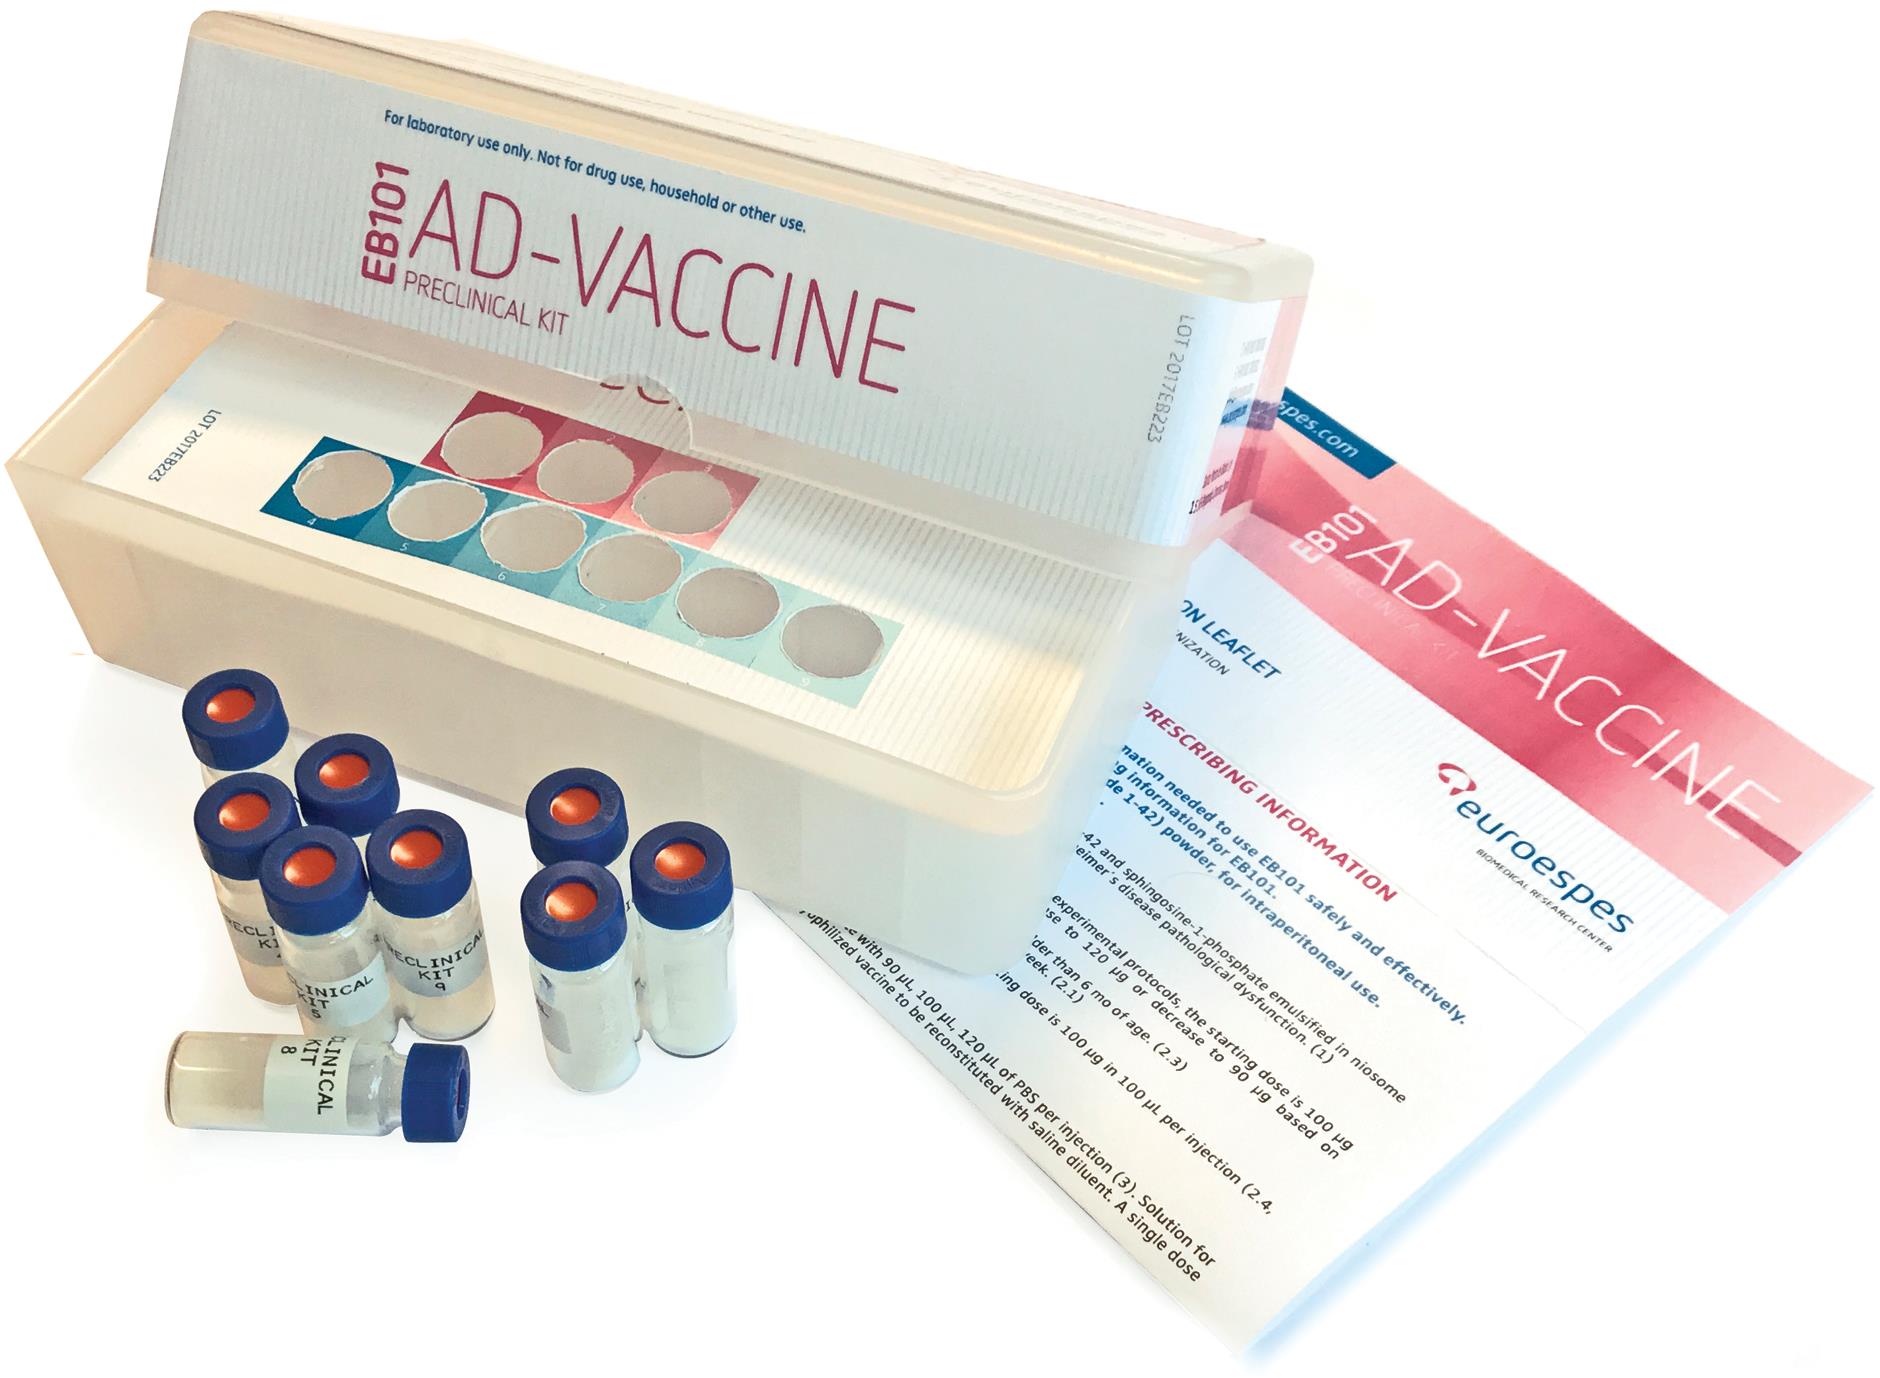 Preclinical EB101 vaccine tool kit for animal models.